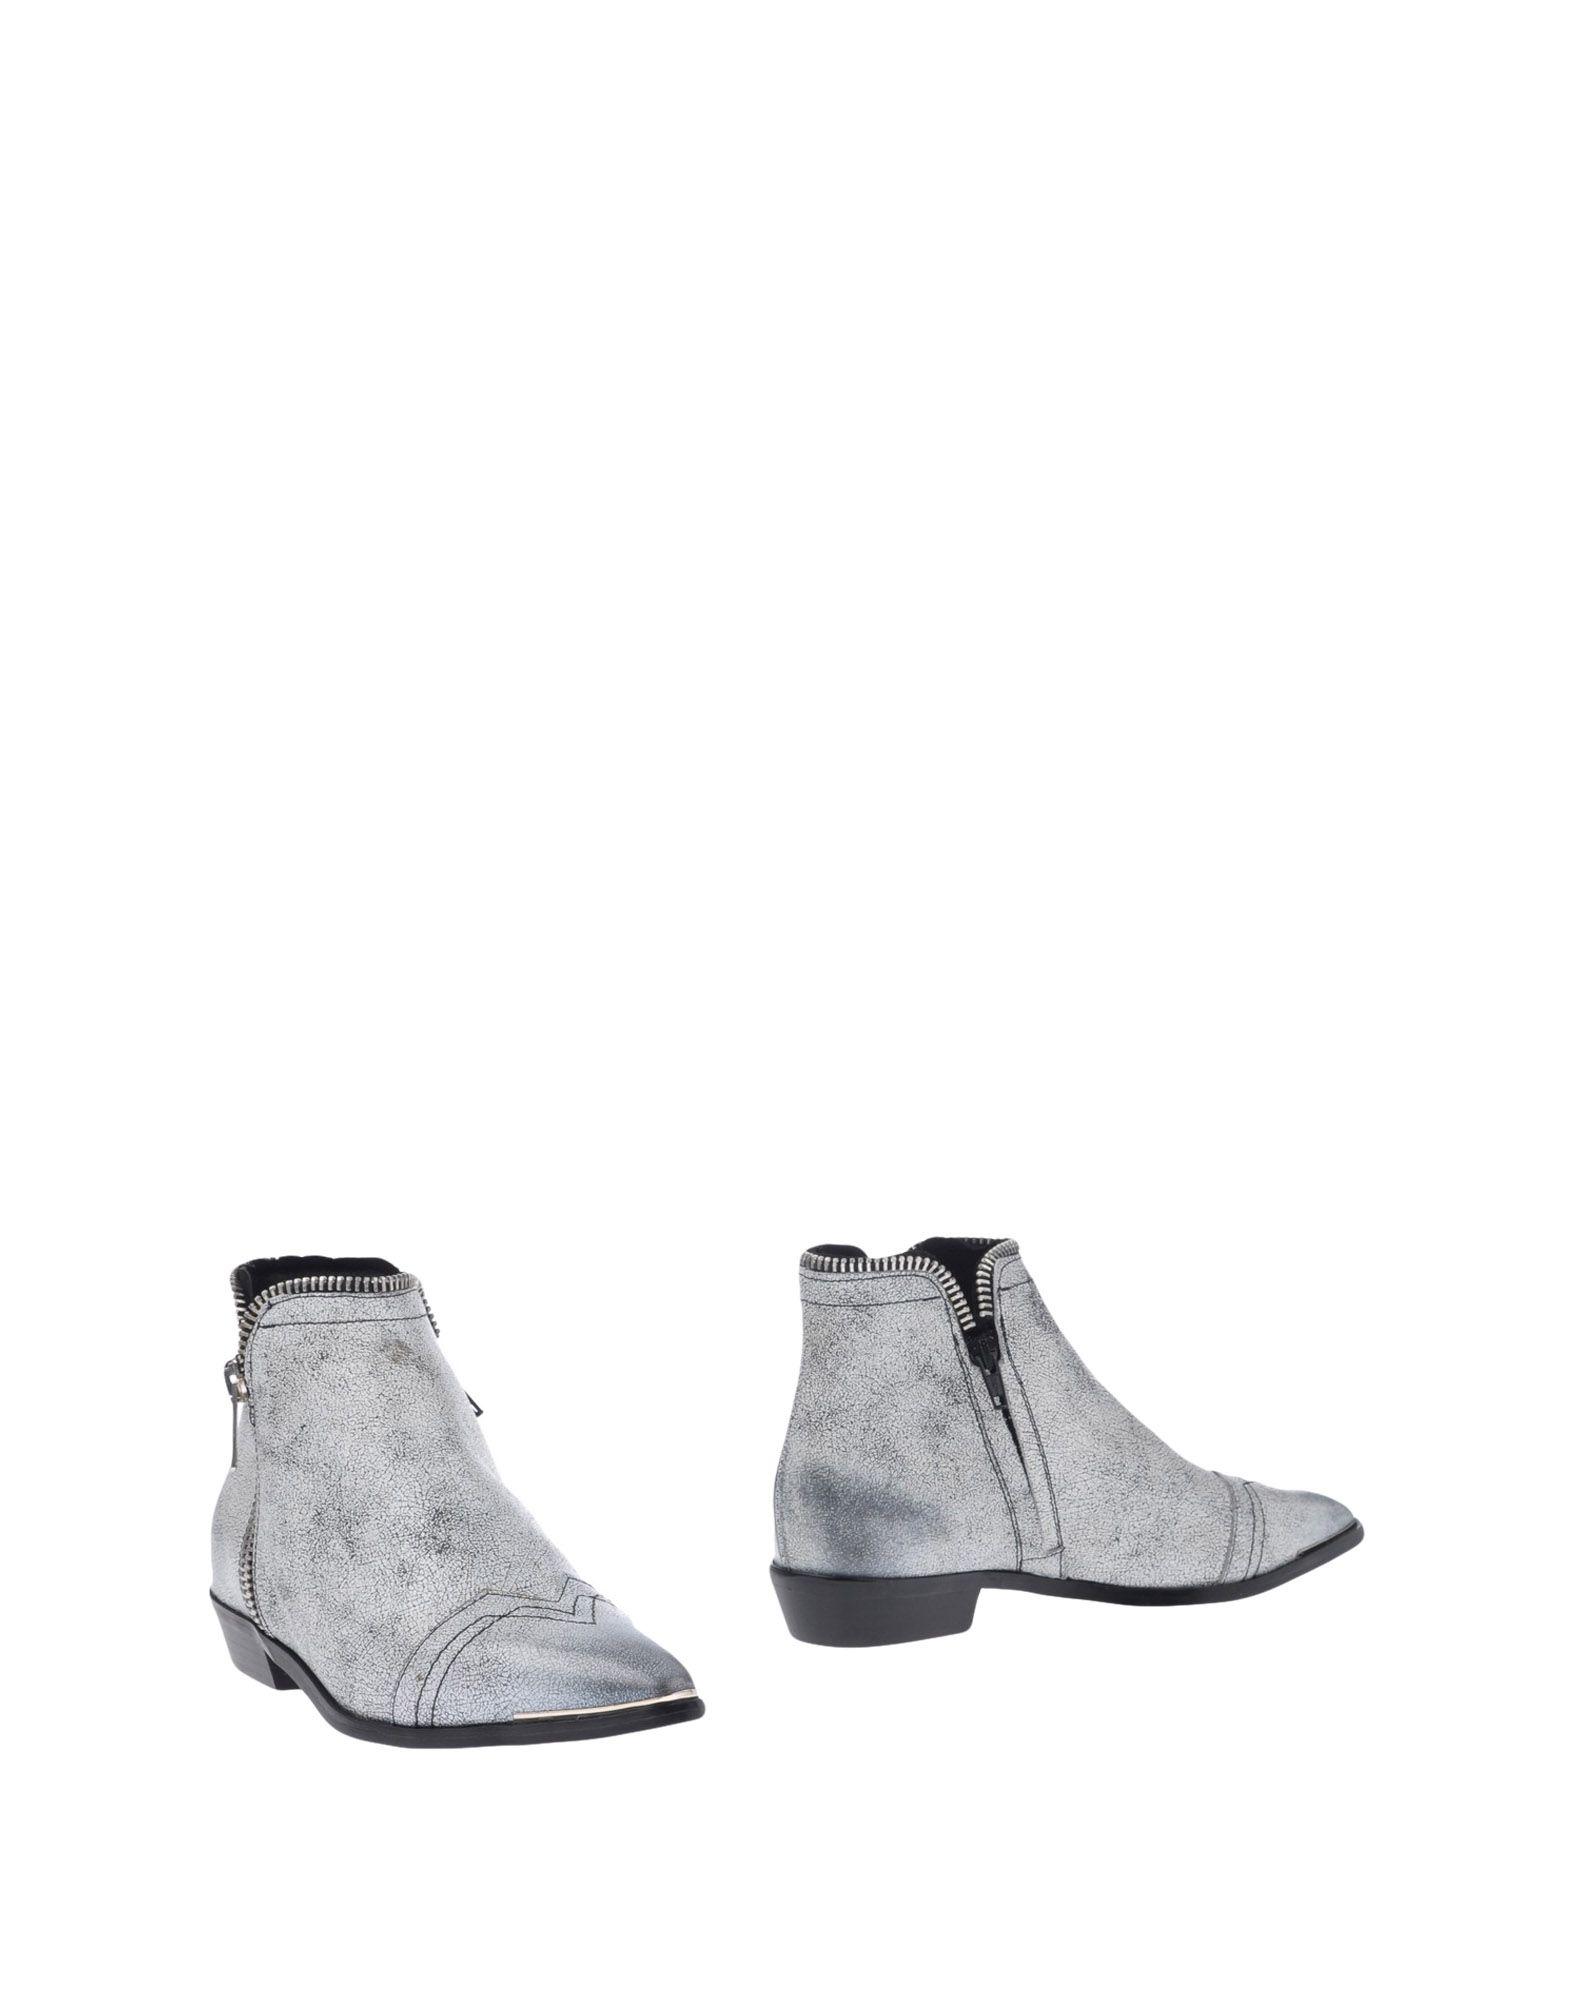 DIESEL Leather Ankle Boots in White - Lyst